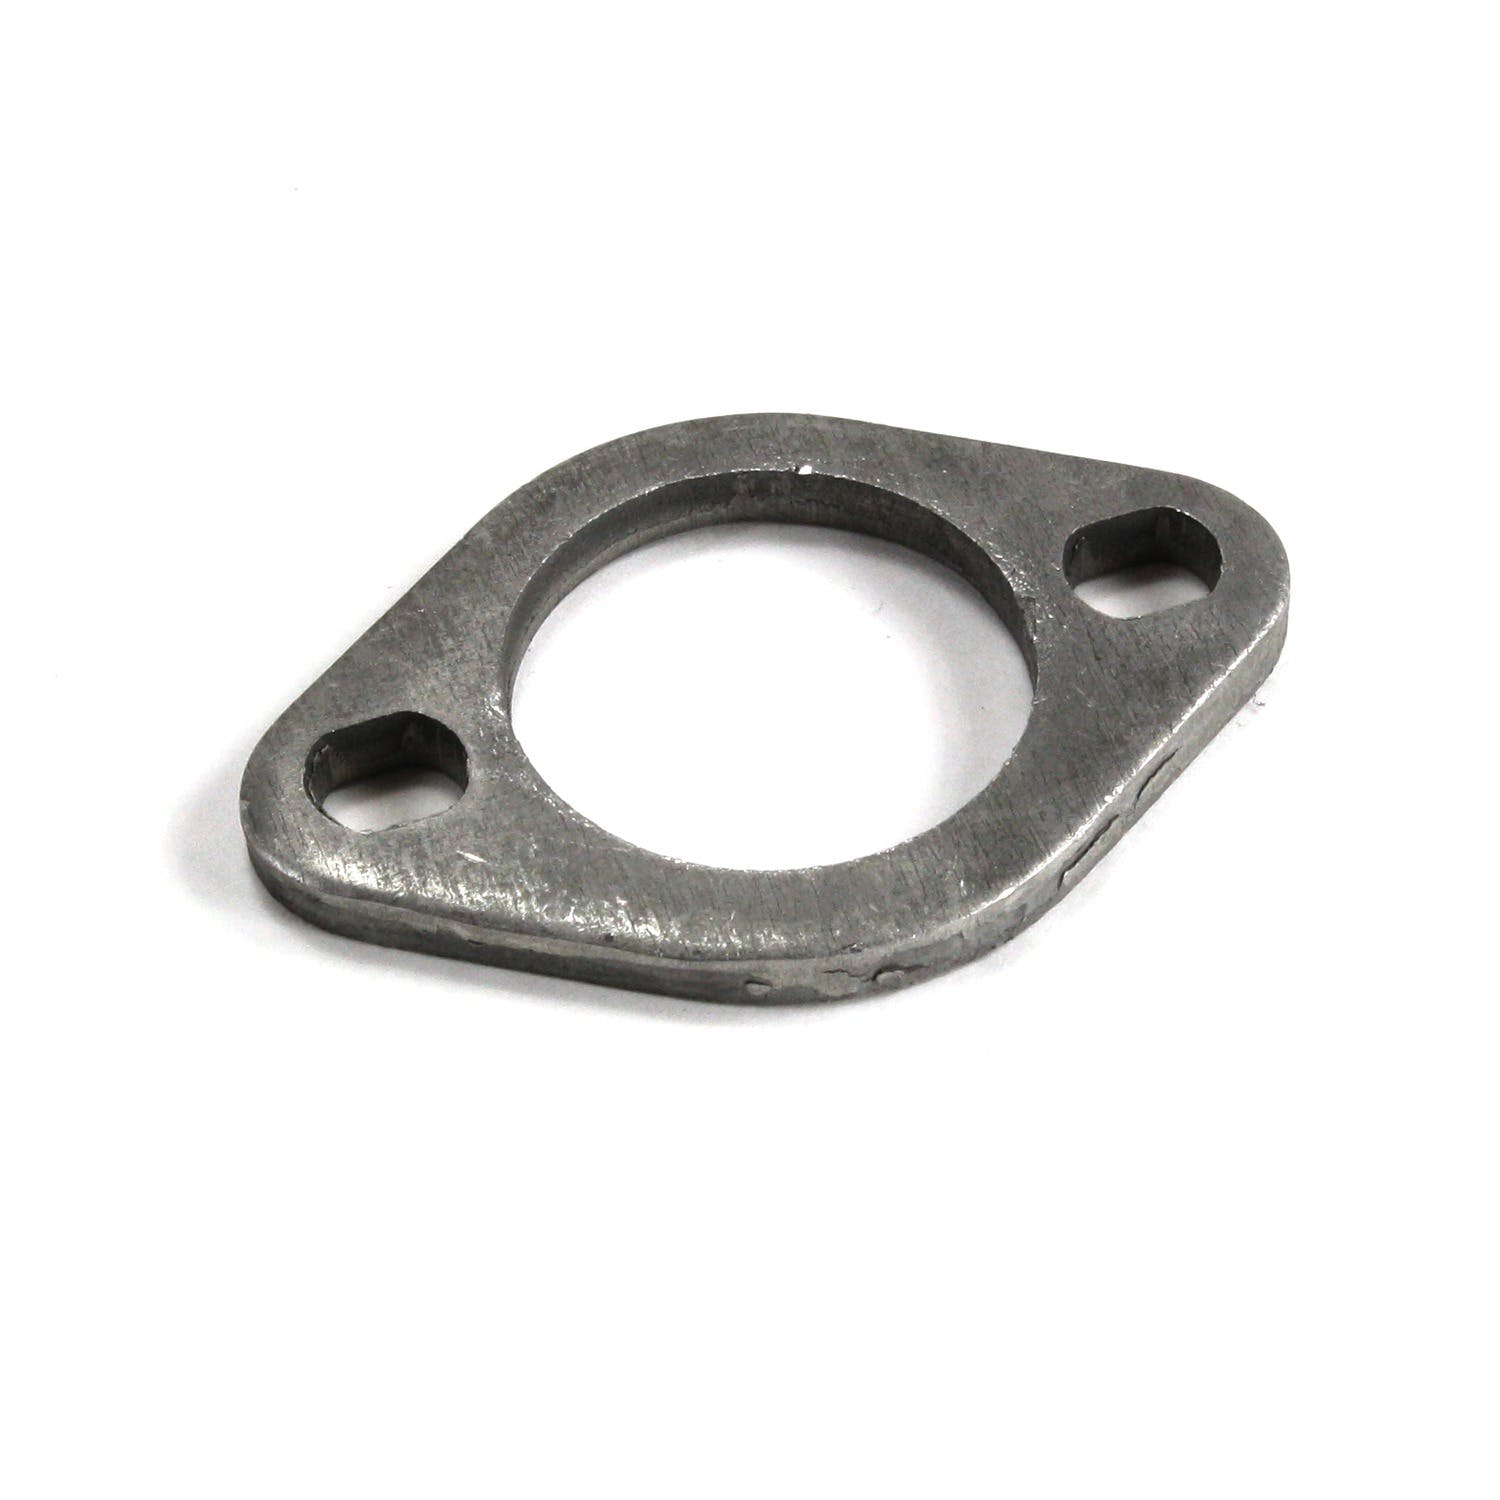 Patriot Exhaust H7255 Collector Flange 1 1/2 inch 2 Bolt